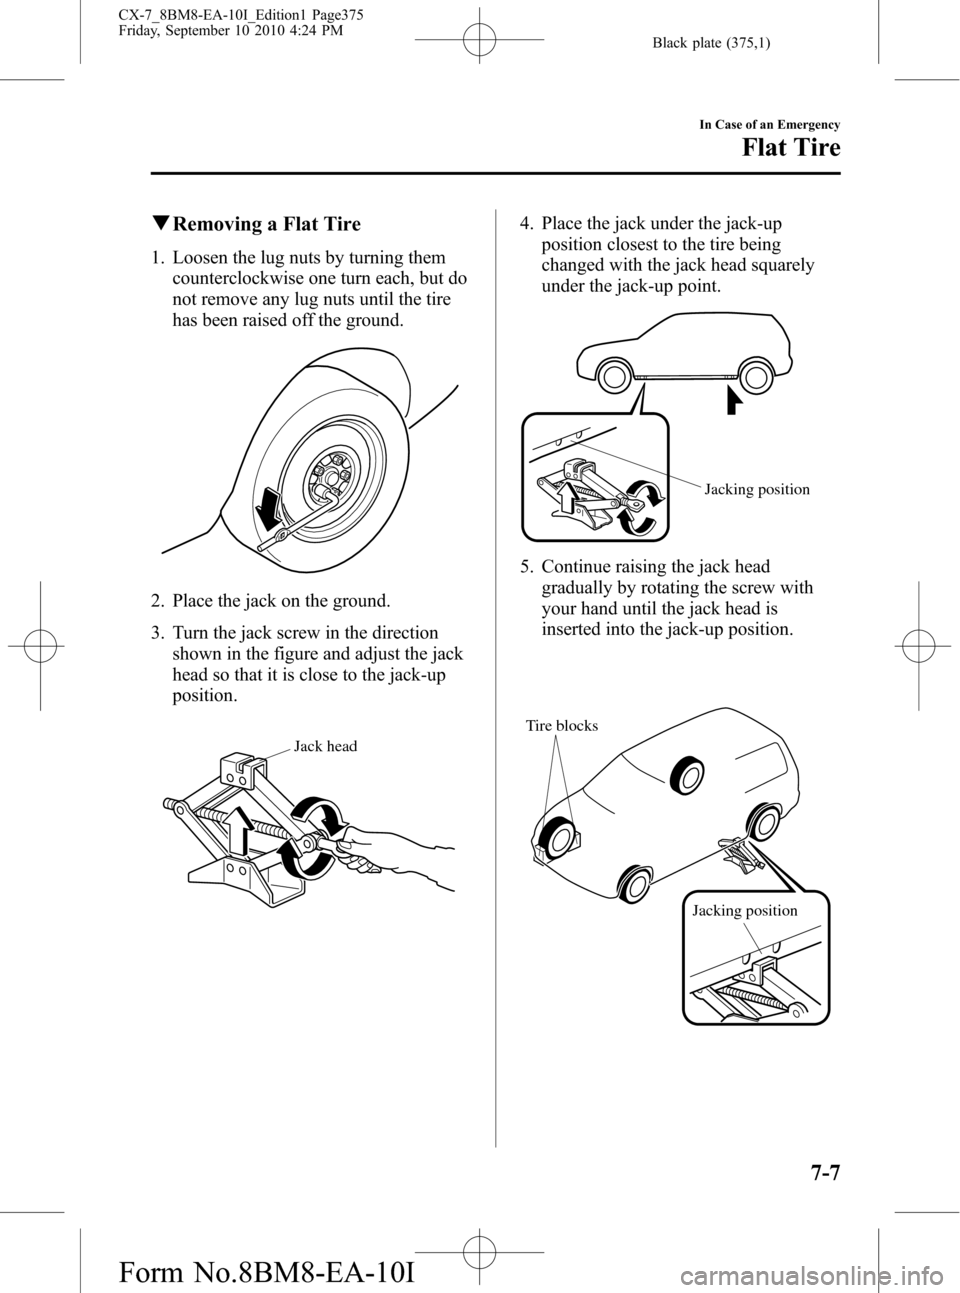 MAZDA MODEL CX-7 2011  Owners Manual (in English) Black plate (375,1)
qRemoving a Flat Tire
1. Loosen the lug nuts by turning them
counterclockwise one turn each, but do
not remove any lug nuts until the tire
has been raised off the ground.
2. Place 